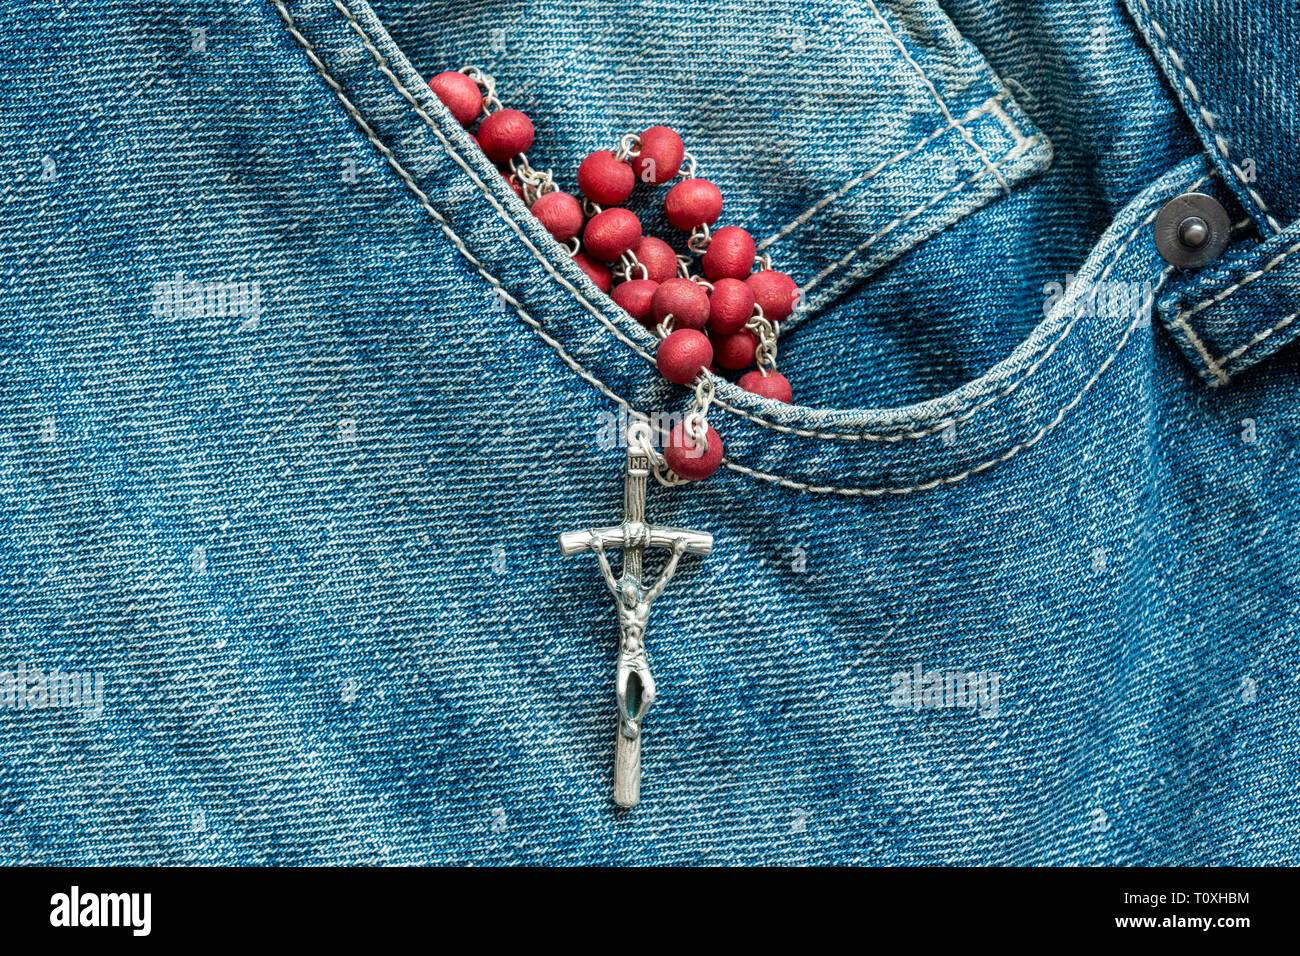 Catholic rosary in the pocket of the blue jeans Stock Photo - Alamy